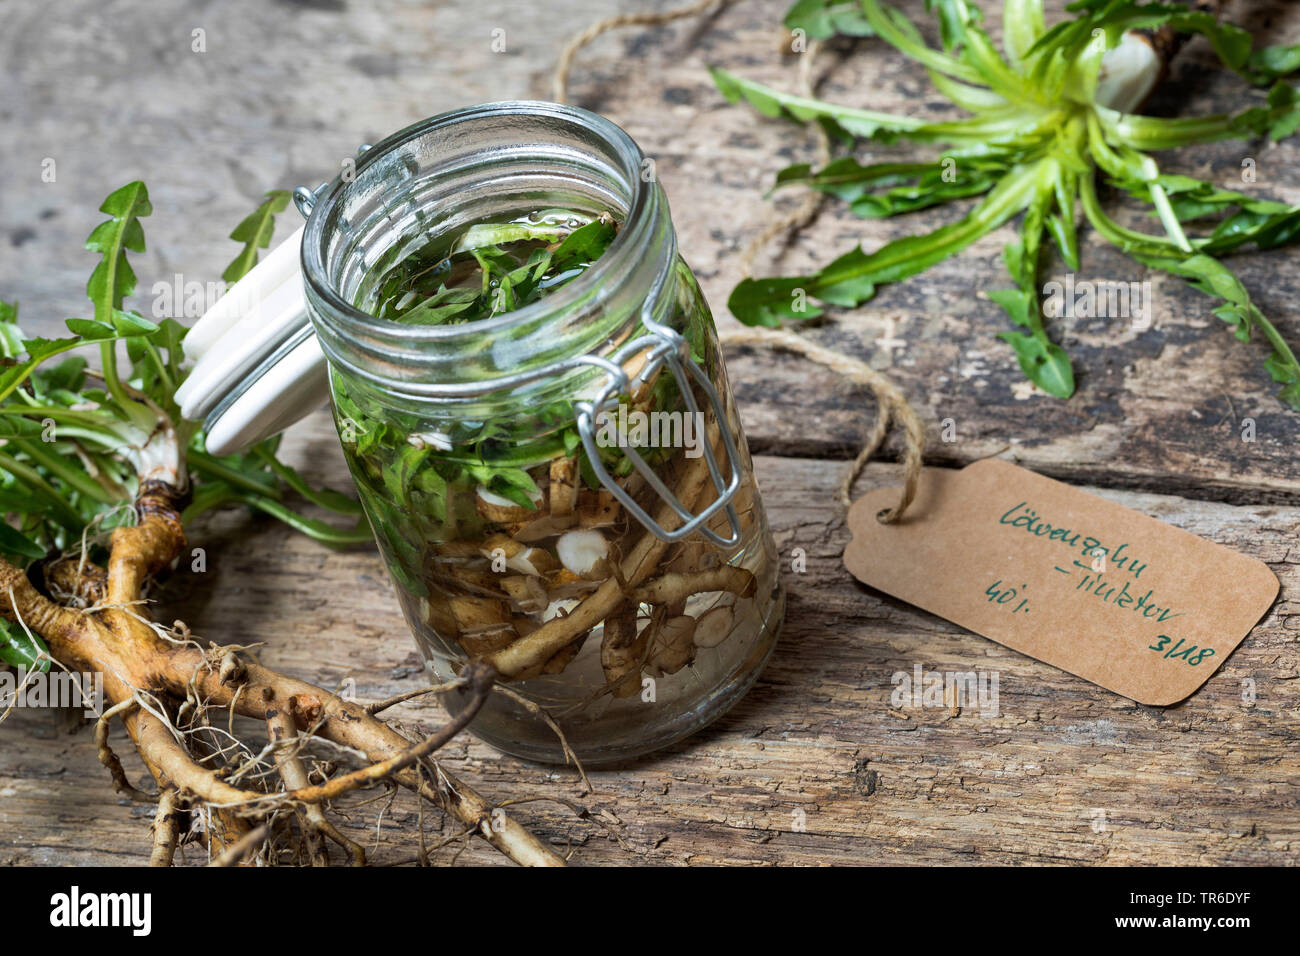 common dandelion (Taraxacum officinale), selfmade tincture from dandelion roots, Germany Stock Photo